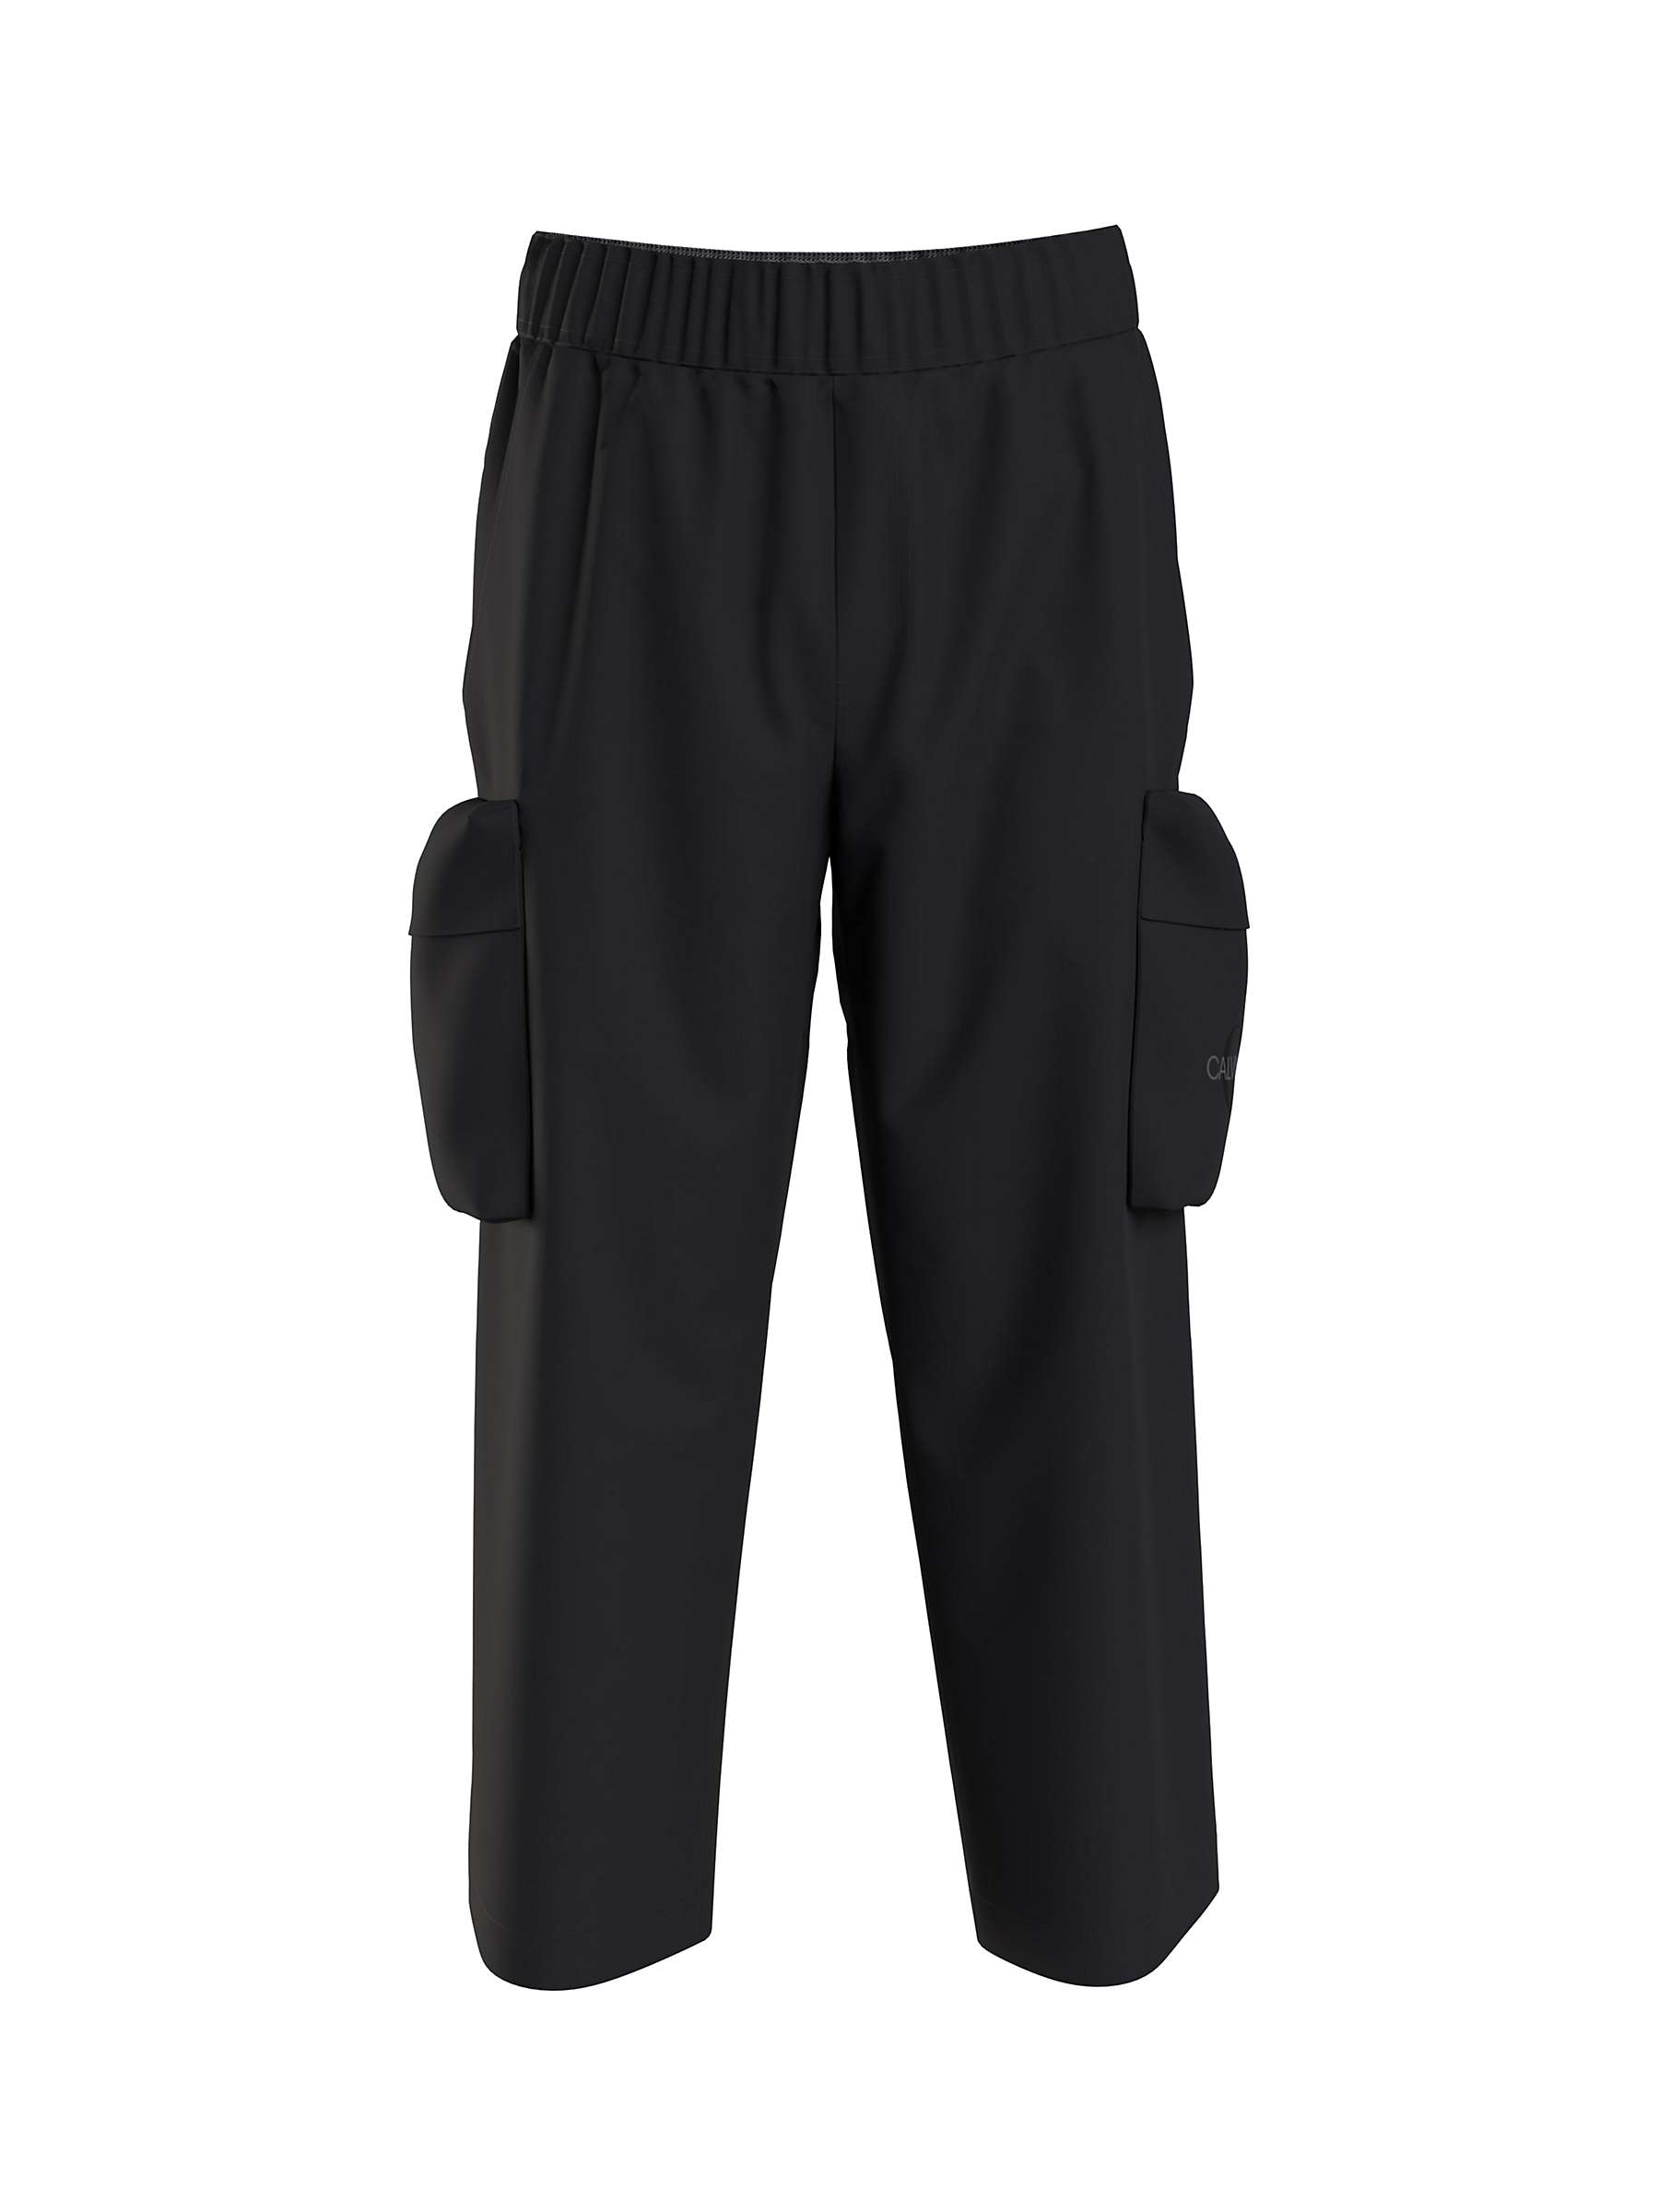 Buy Calvin Klein Jeans Cropped Cargo Trousers, Ck Black Online at johnlewis.com